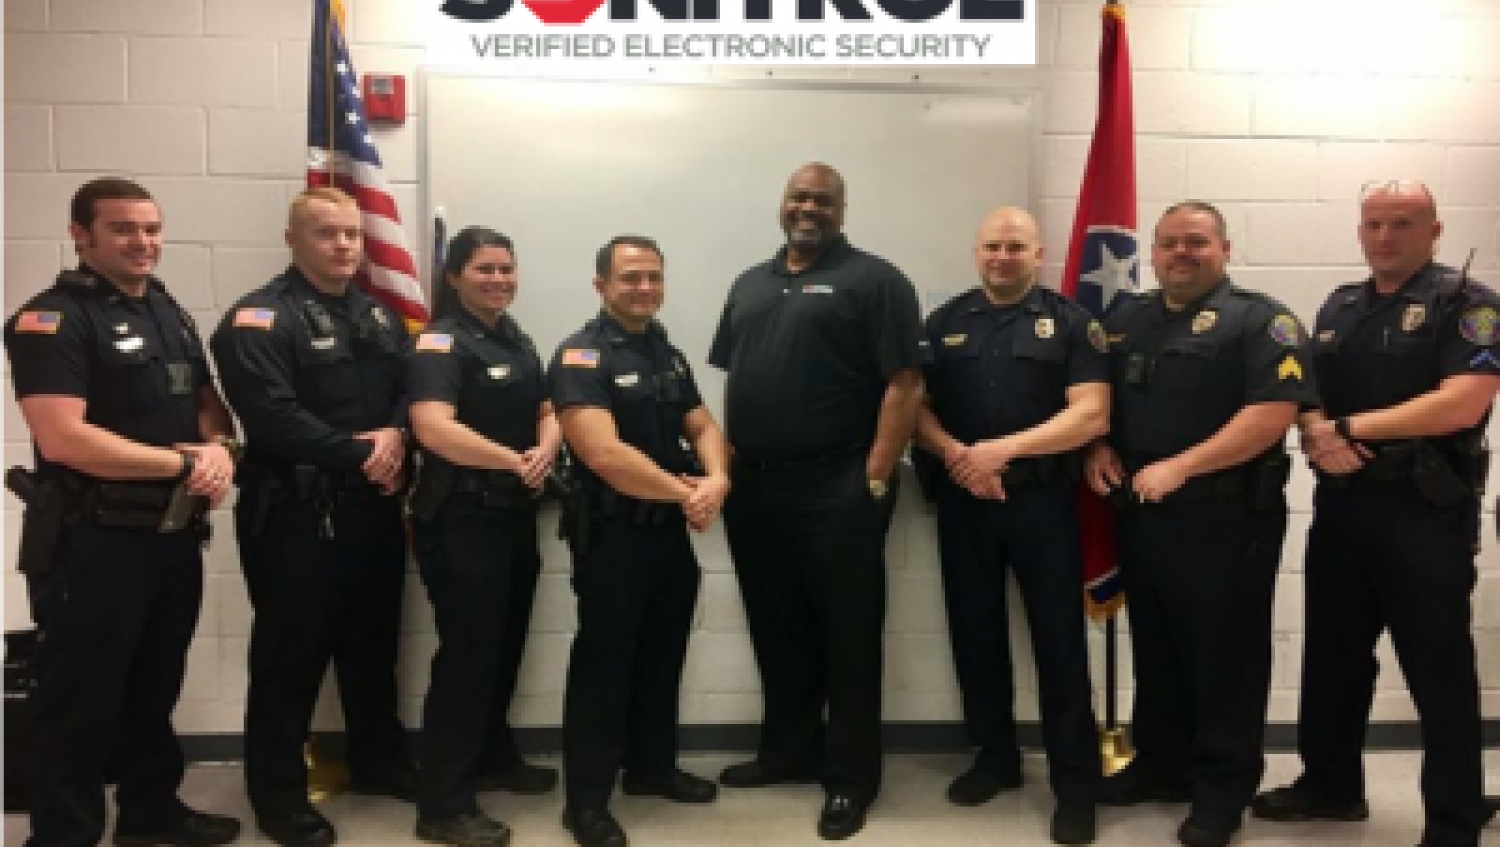 Cleveland Tennessee PD group photo, in front of Sonitrol banner